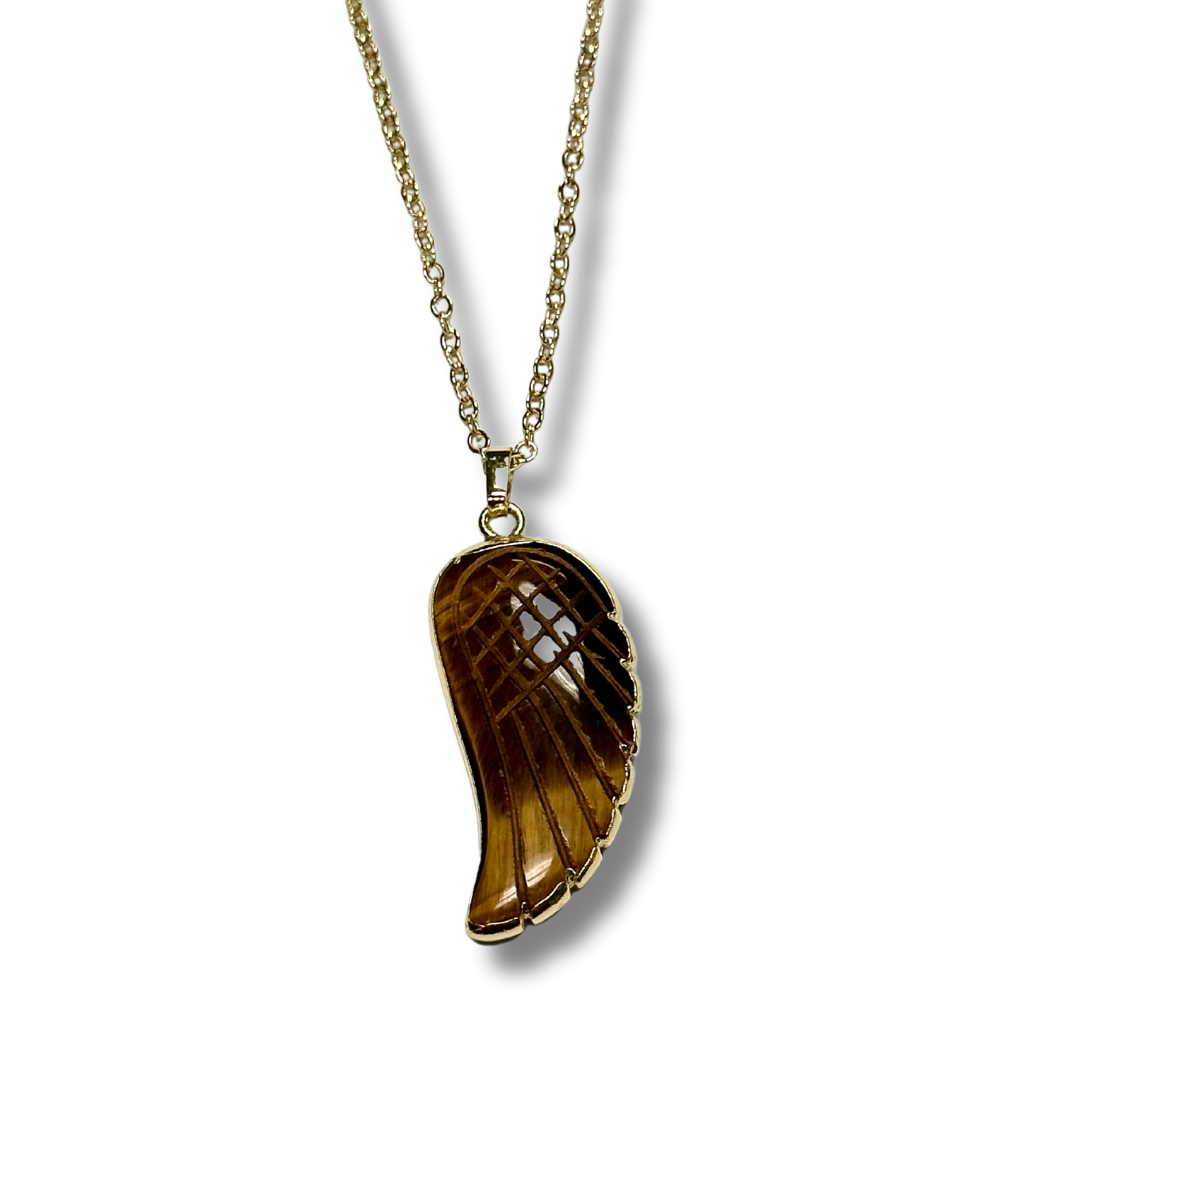 Tiger's Eye Angel Wing Necklace - Gold Plated for Protection and Courage